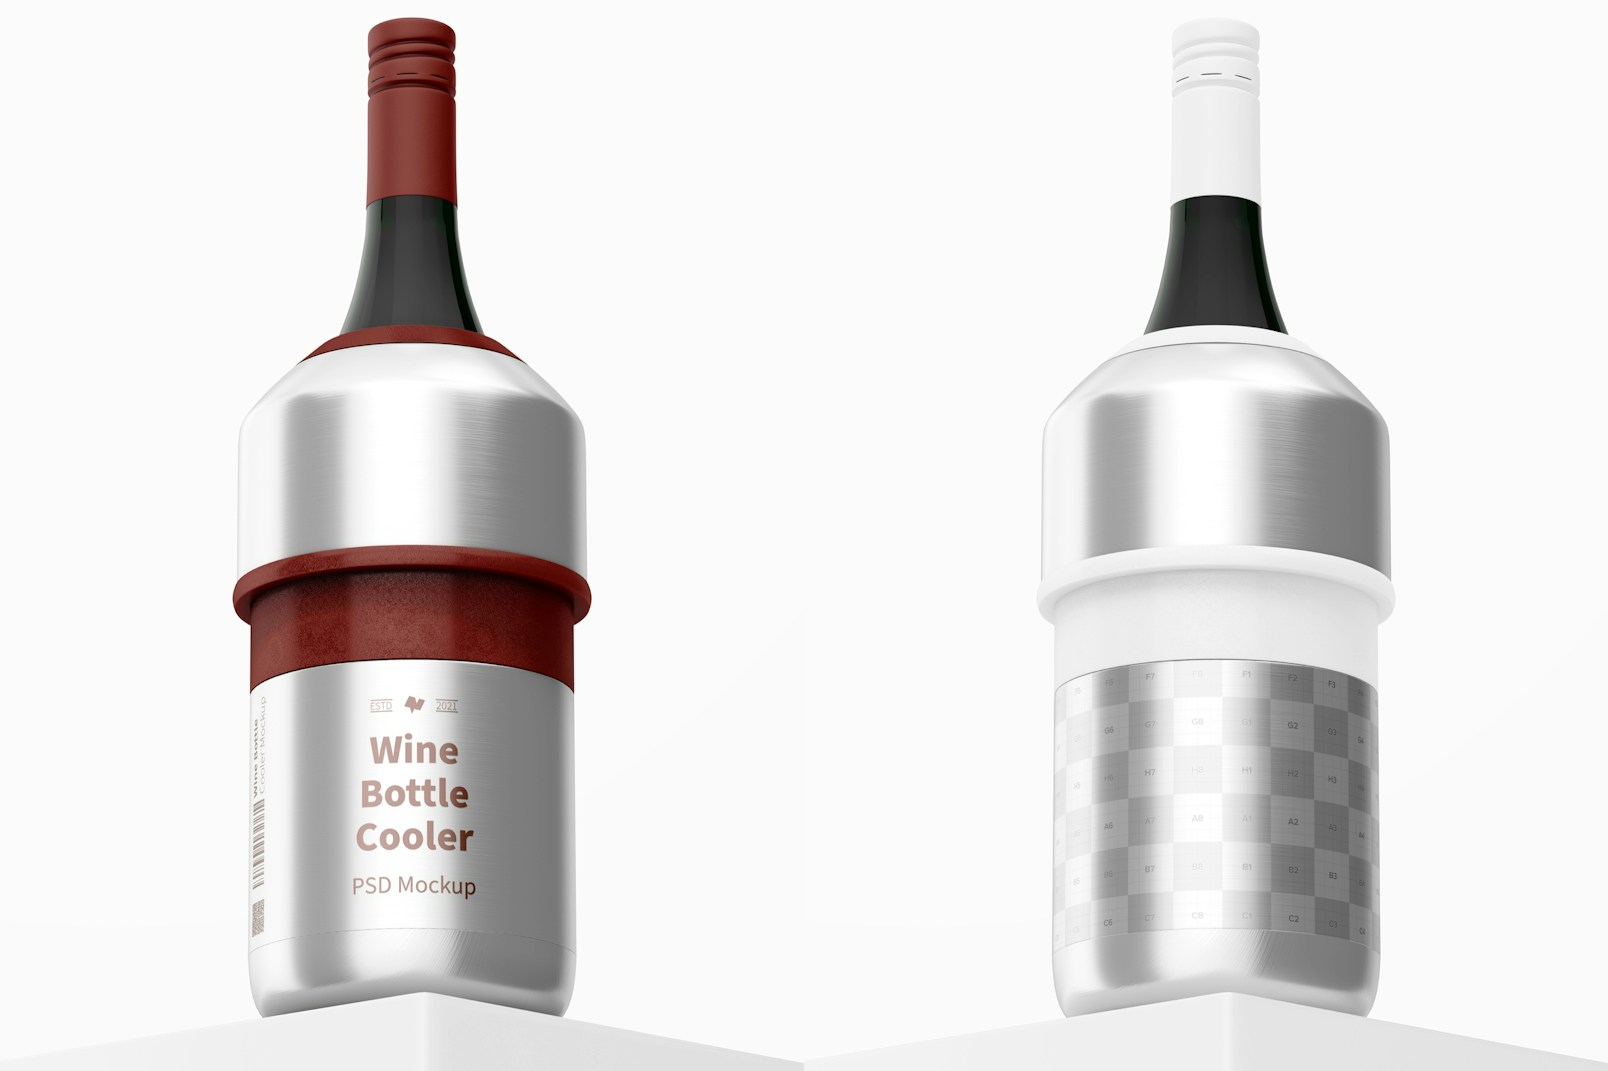 Wine Bottle Cooler Mockup, Low Angle View